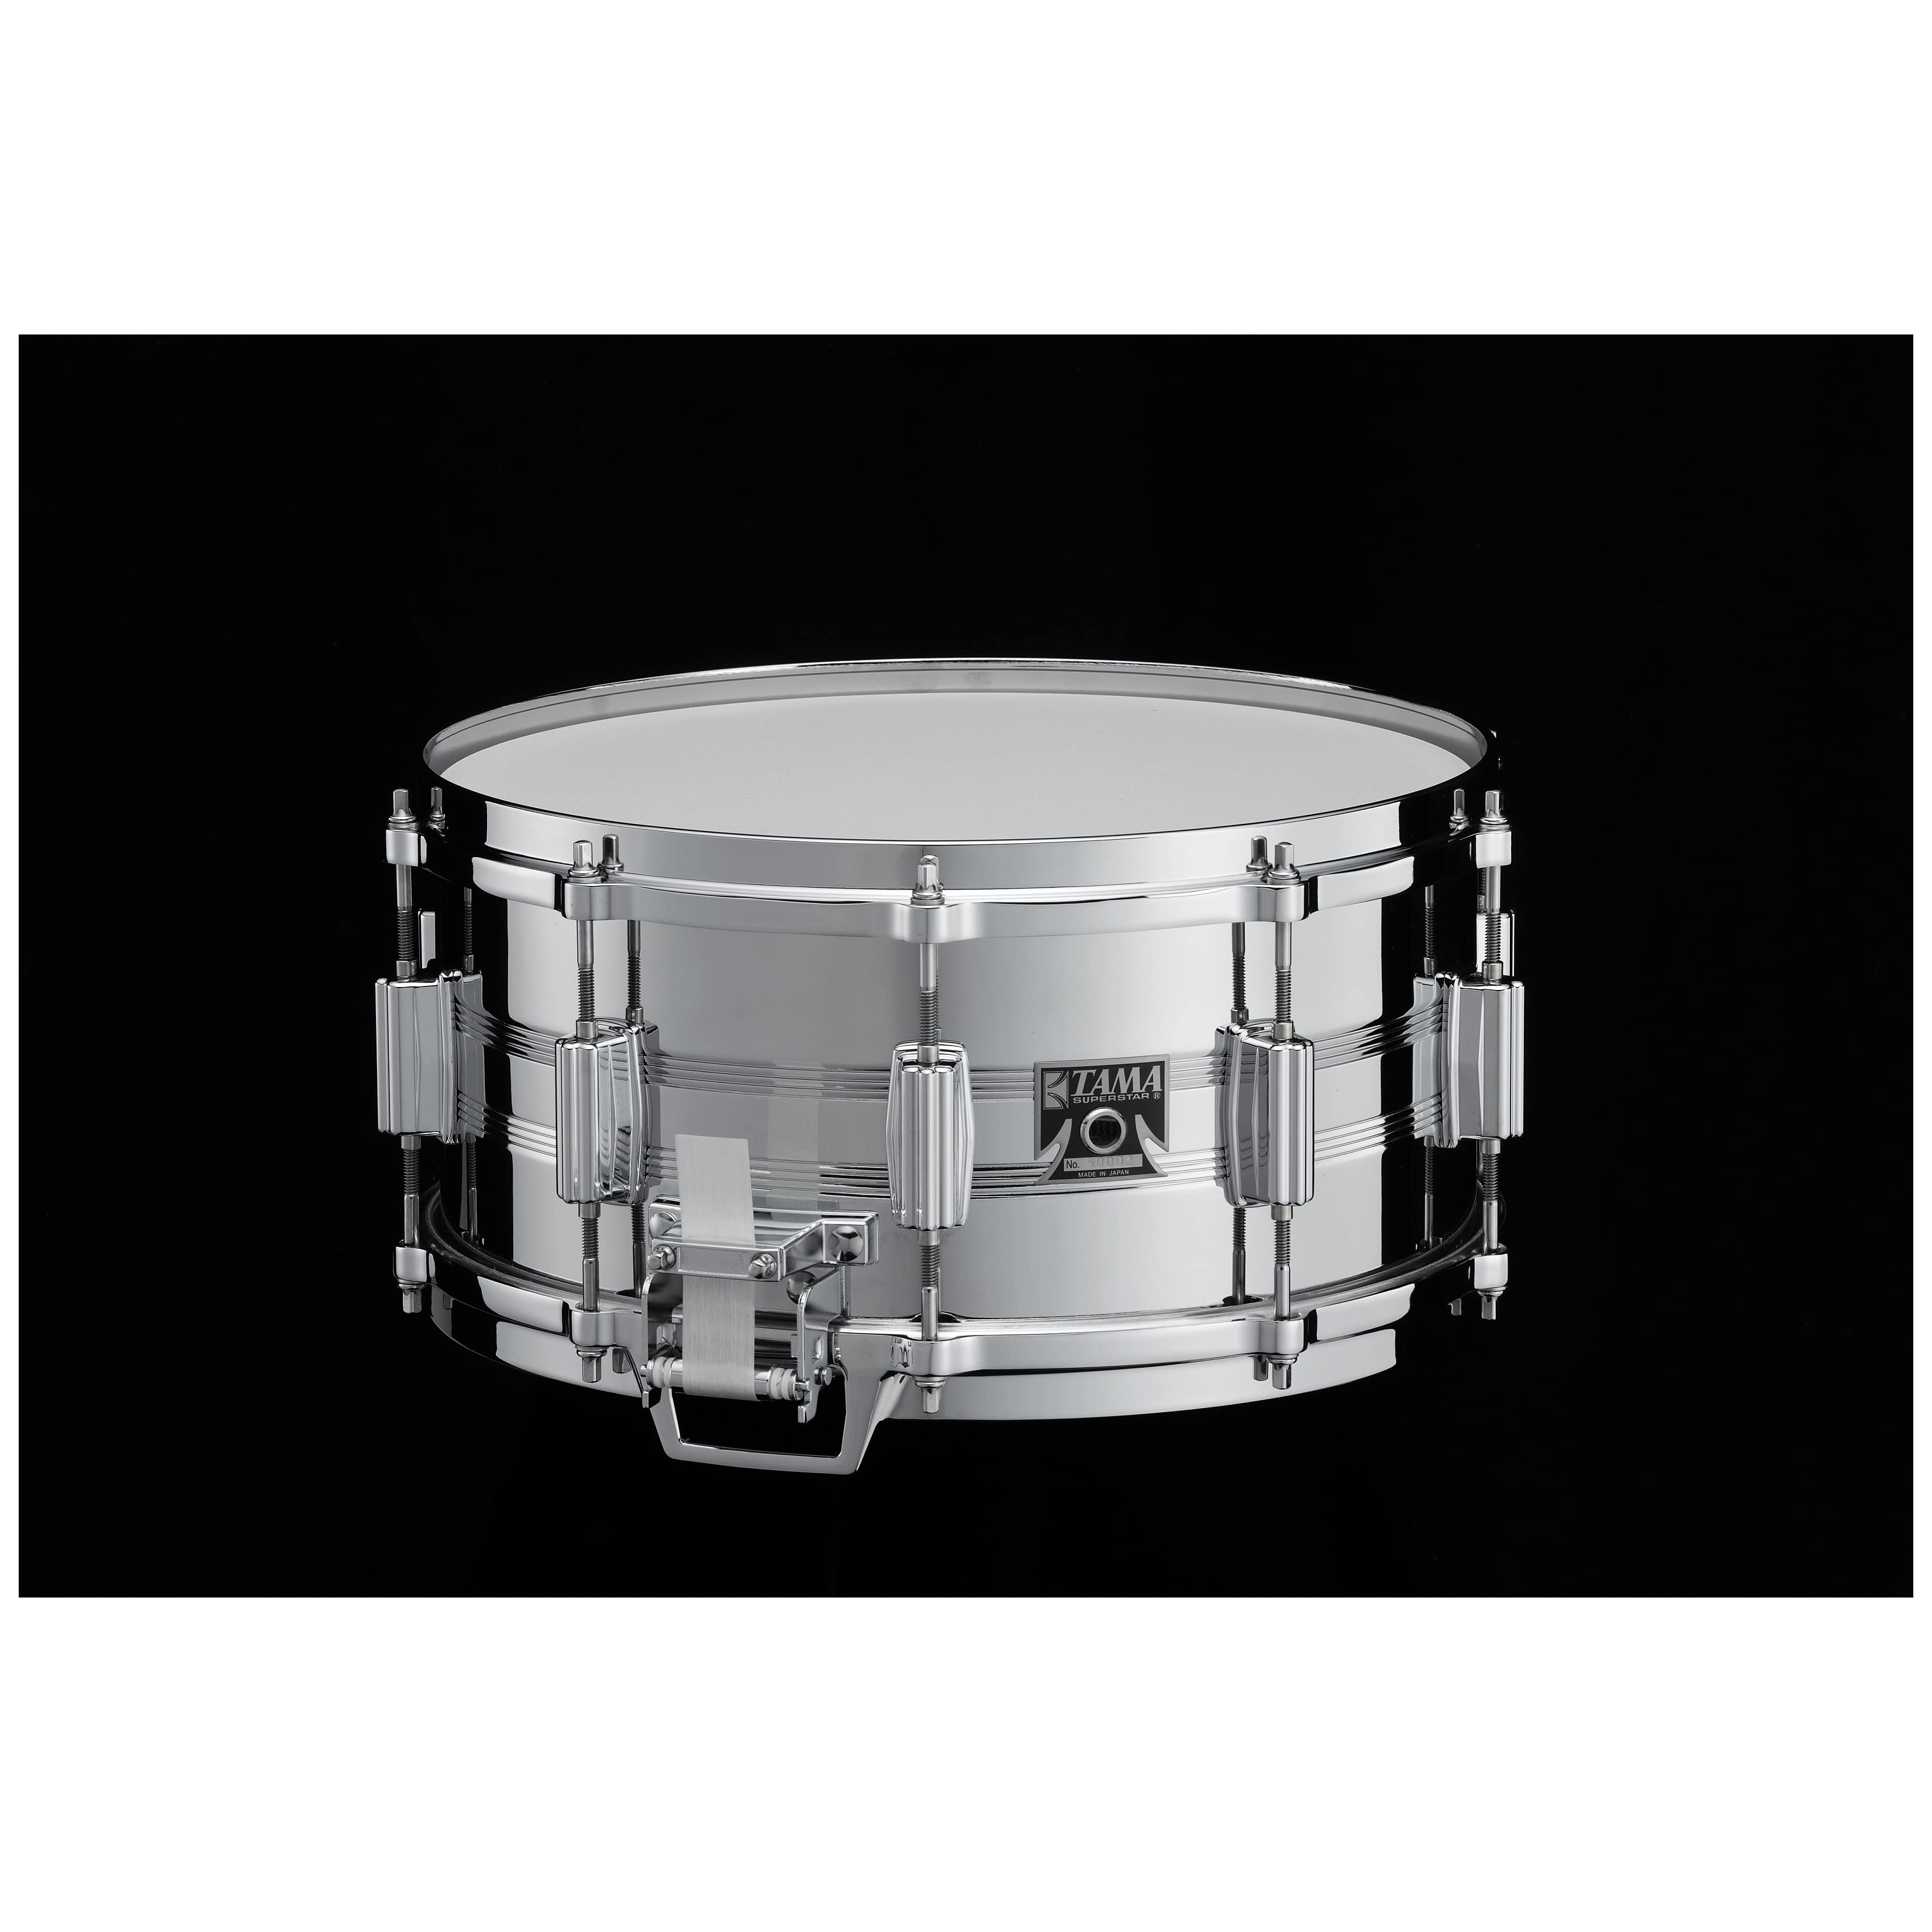 Tama 8056 - 50th LIMITED Mastercraft Steel Snare Drum  14"x6,5" 1